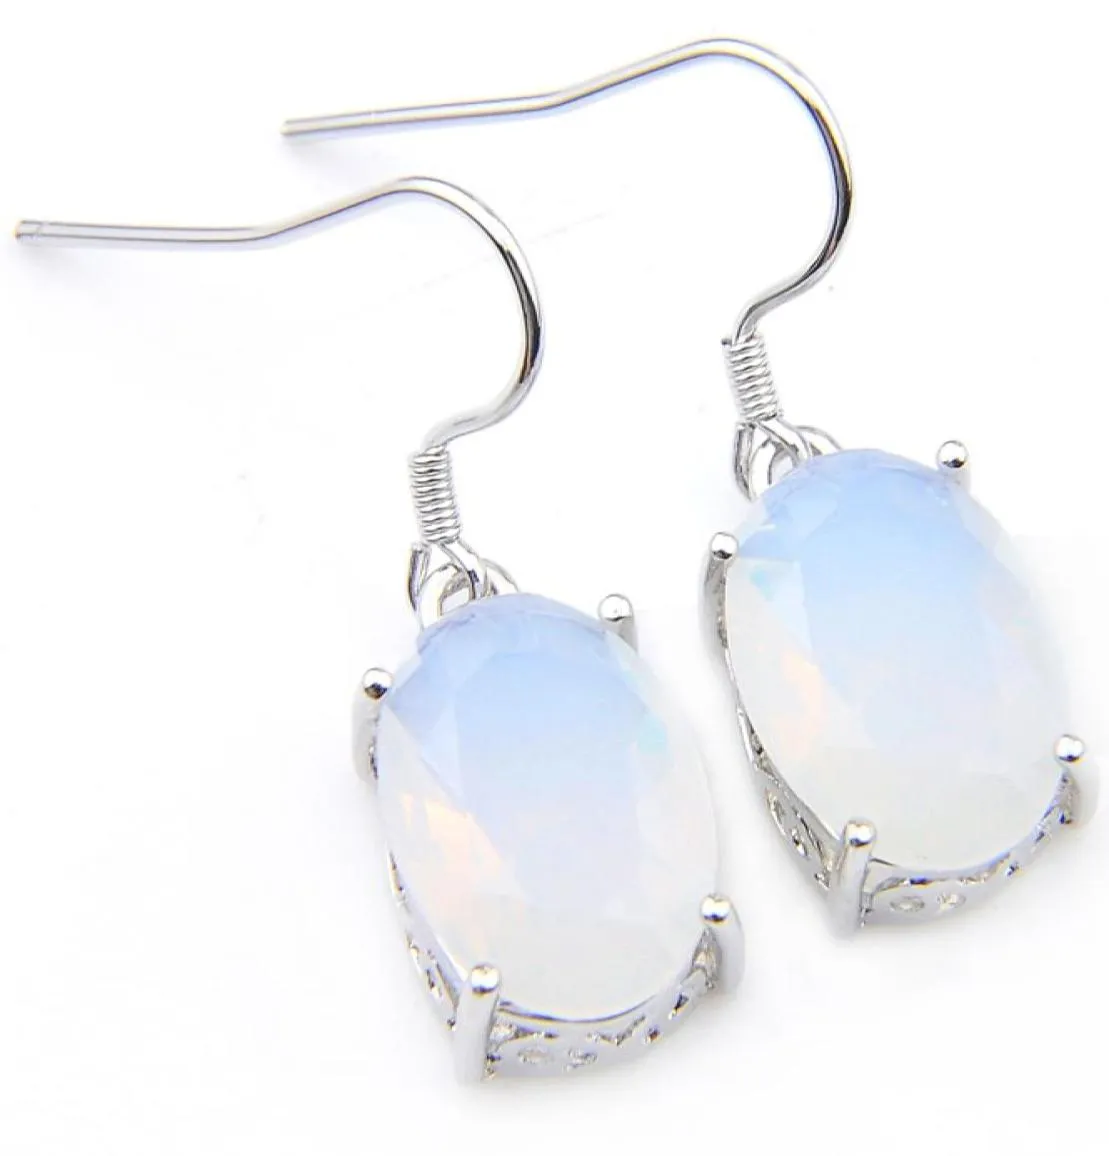 LuckyShine Christmas 6 Par 925 Silver Plated 1014 MM FashionForward White Moonstone Earrings for Lady Party Gift E01399900494